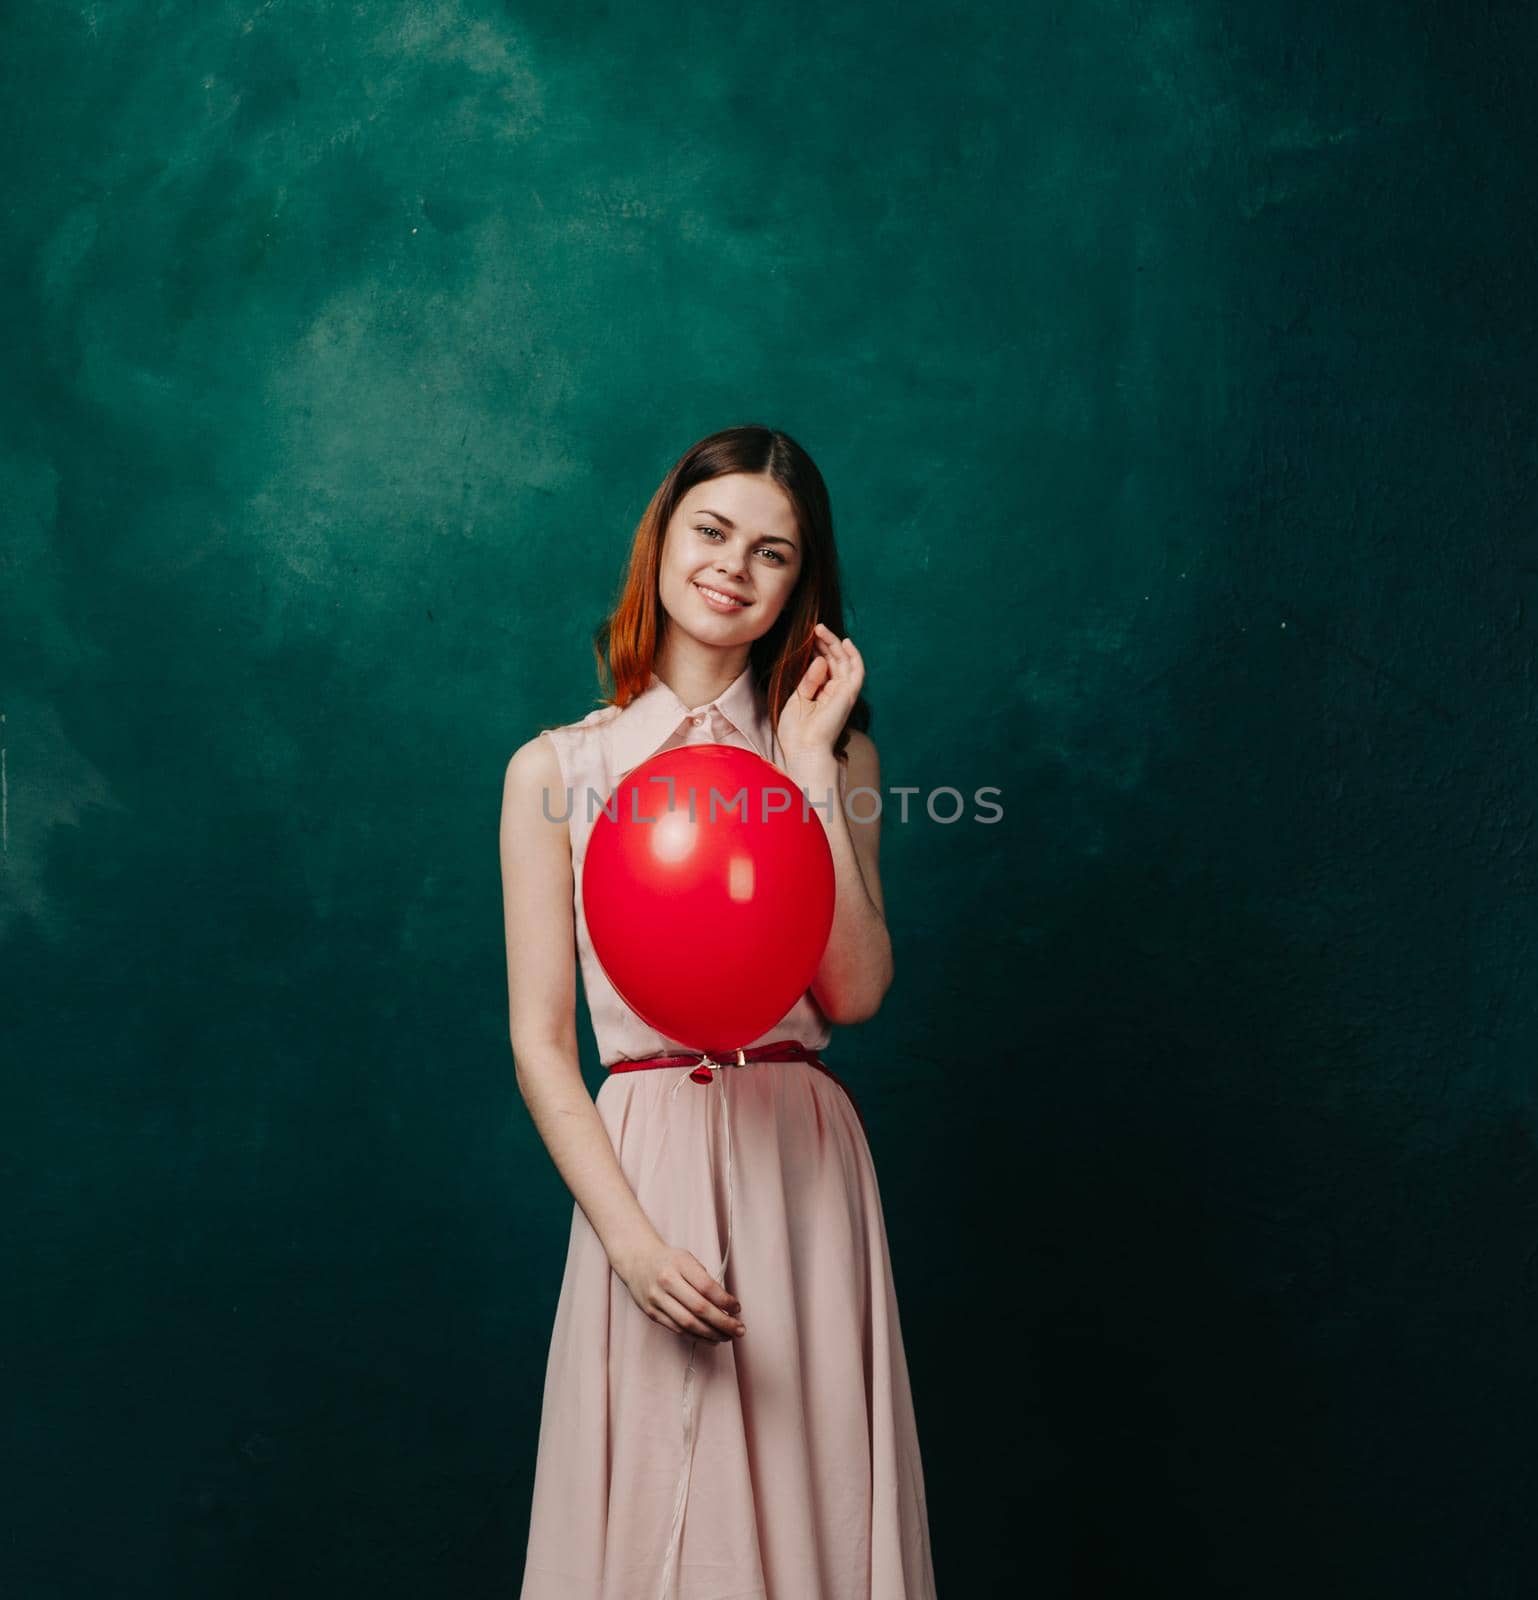 woman with red balloon on green background holiday fun. High quality photo